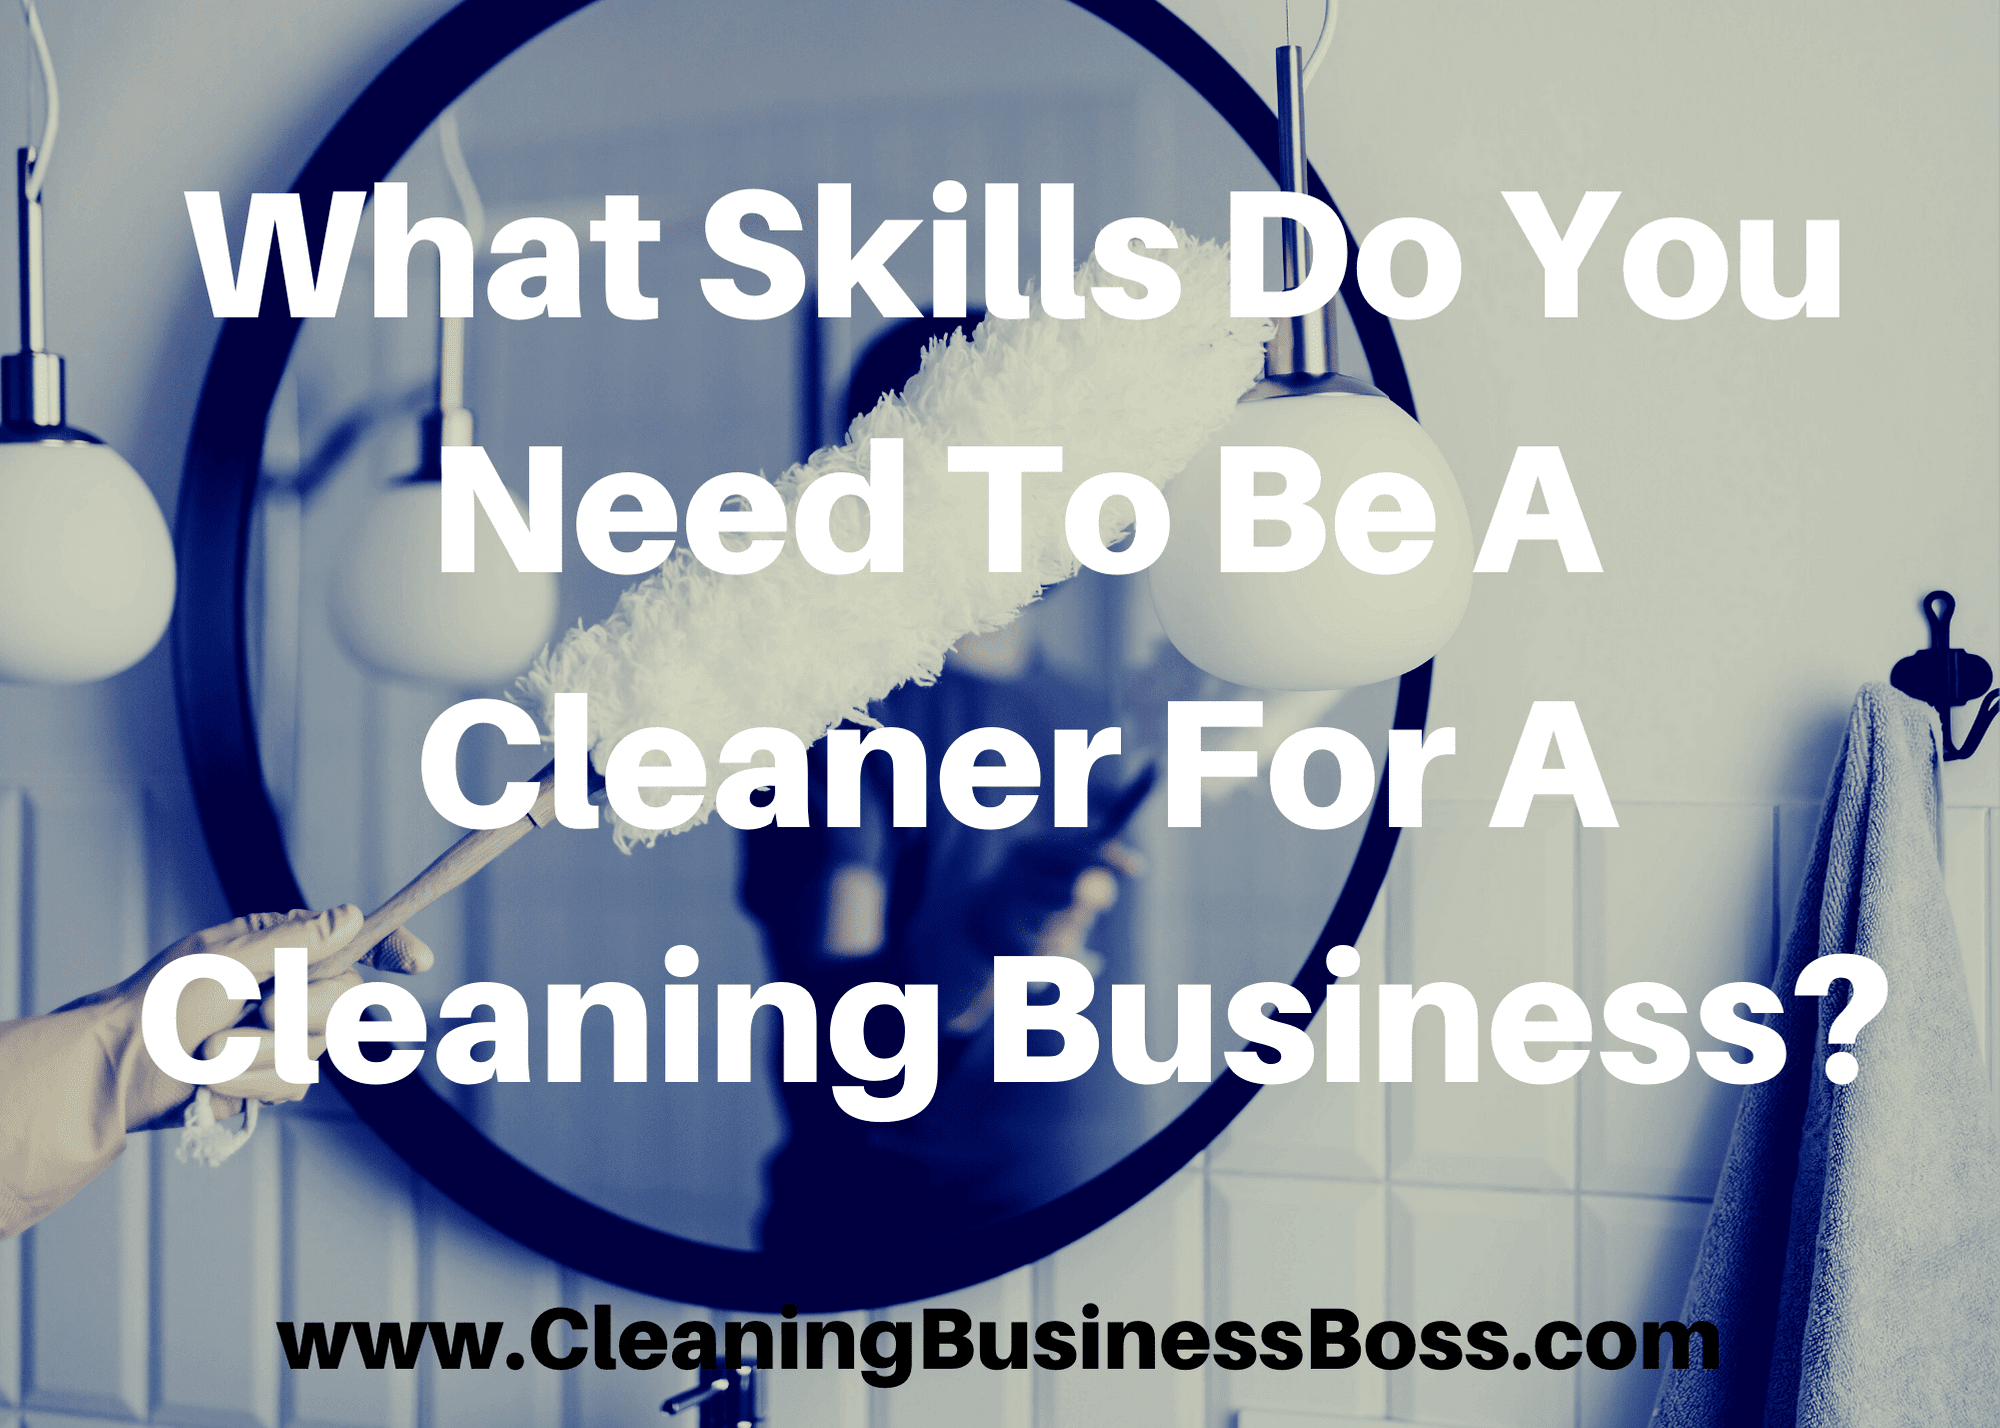 What Skills Do You Need To Be A Cleaner For A Cleaning Business